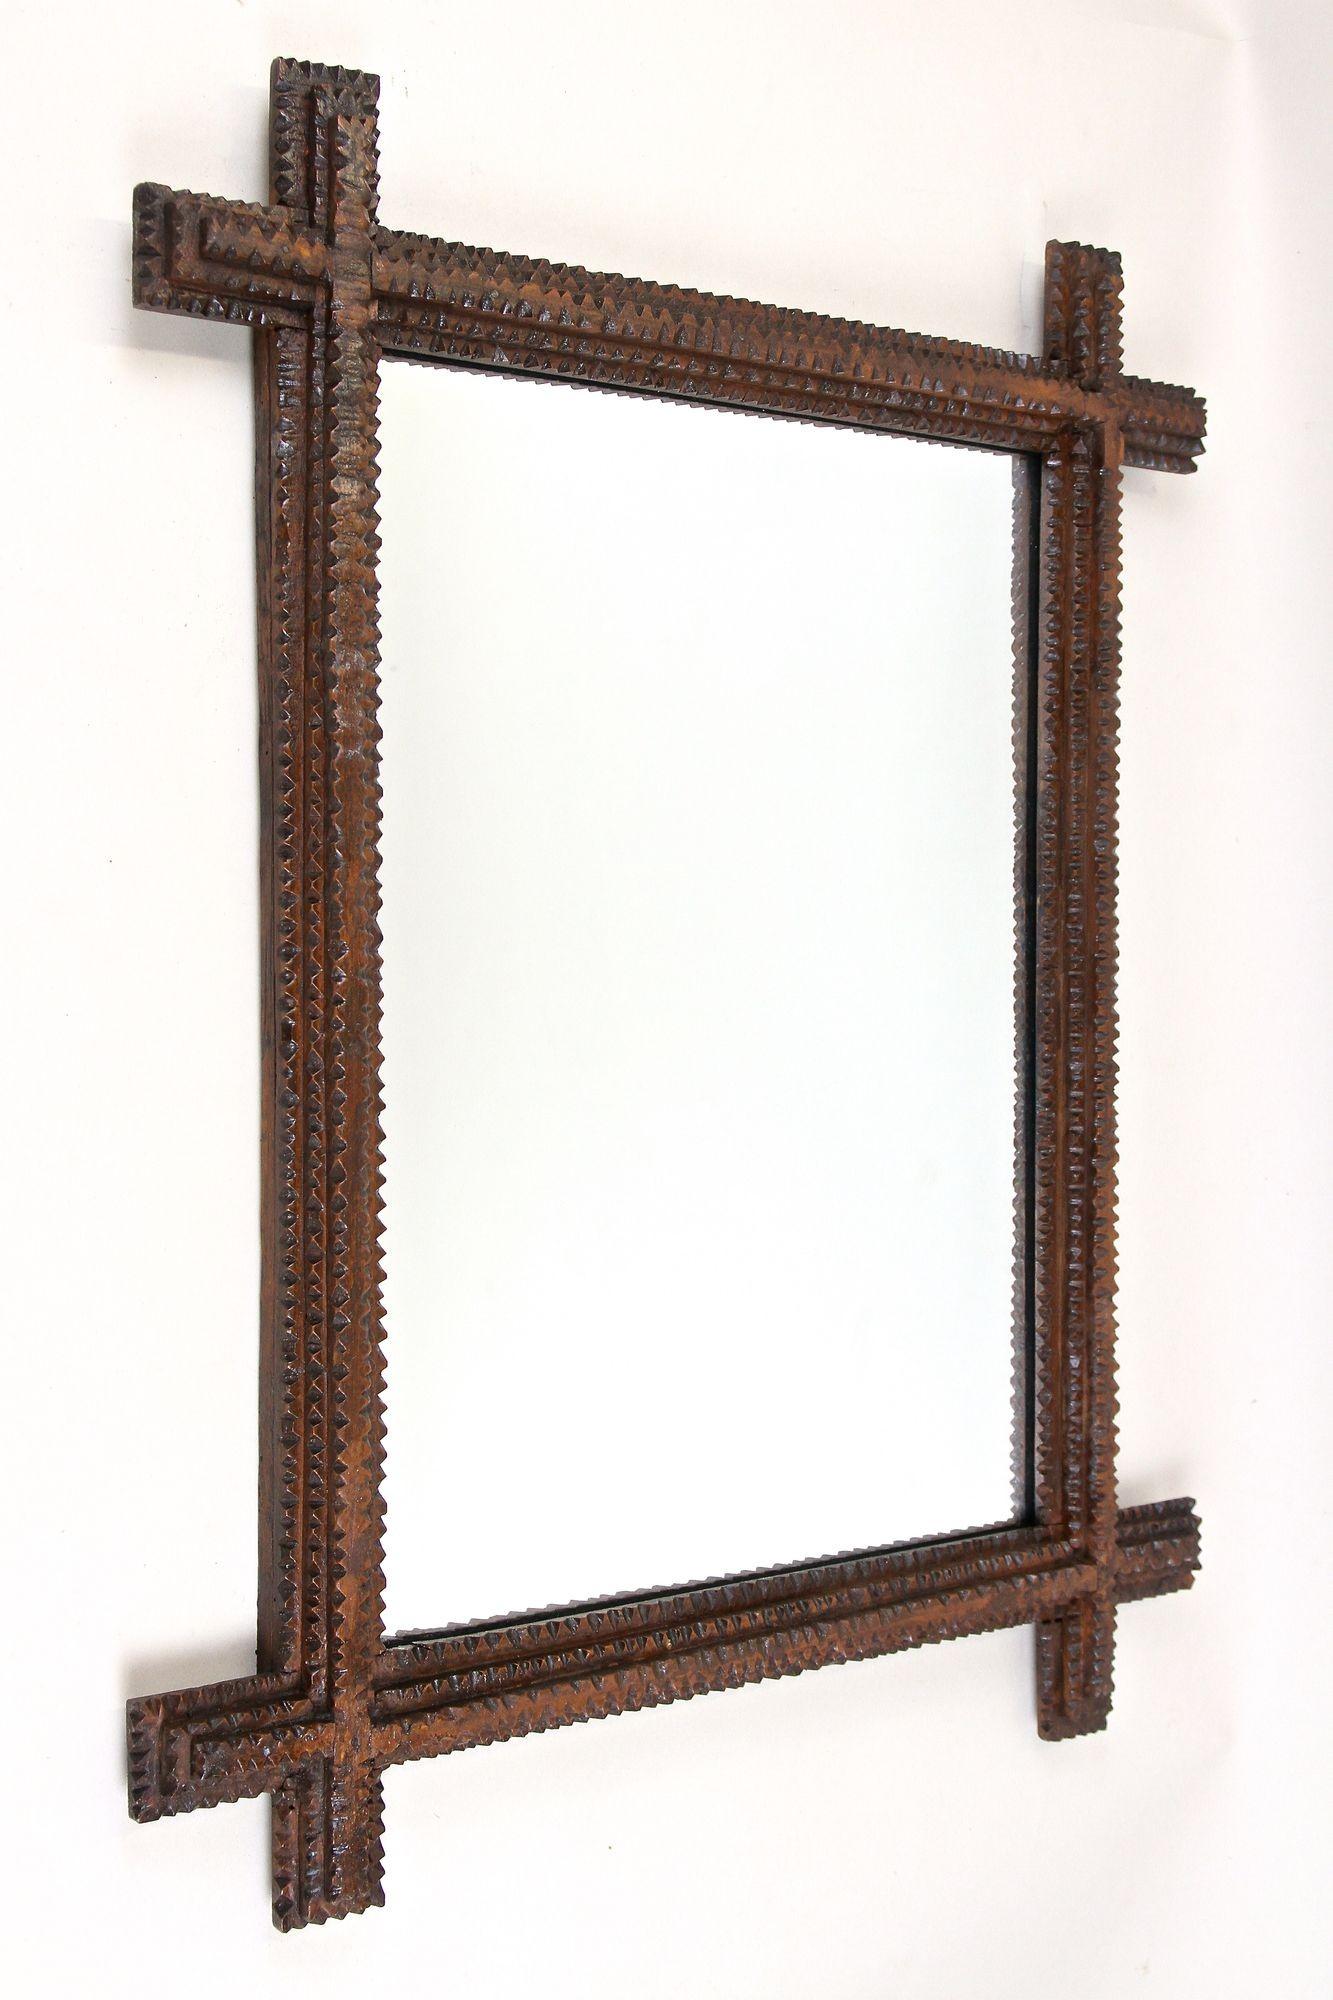 Lovely rustic Tramp Art mirror from the 19th century in Austria. This unique rural wall mirror from around 1860 convinces by its great looking, unusual handcrafted design. The extraordinary chip carved frame confers this older example of a Tramp Art